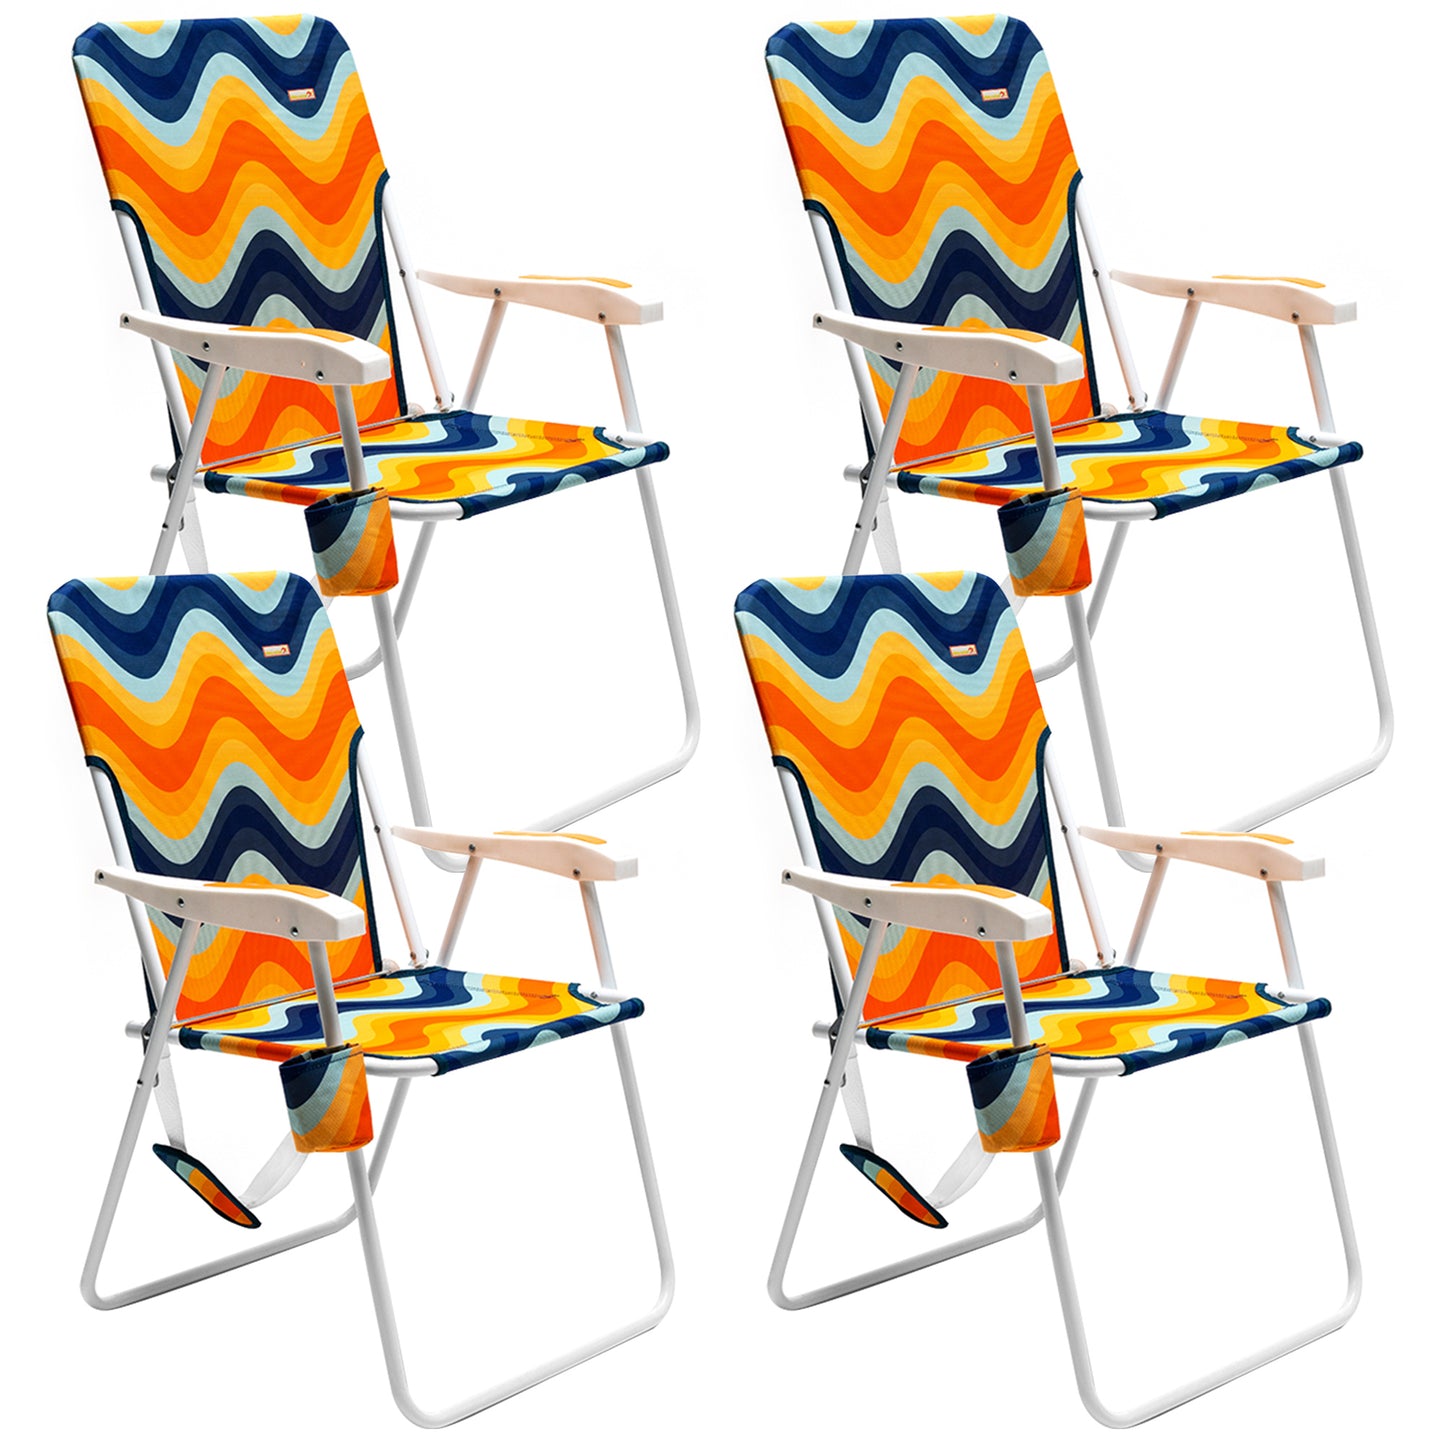 Sunnyfeel Tall Folding Beach Chair Lightweight, Portable High Sand Chair For Adults Heavy Duty 300 LBS With Cup Holders, Foldable Camping Lawn Chair For Camp/ Outdoor/ Travel/ Picnic/ Concert (OrangeWave)